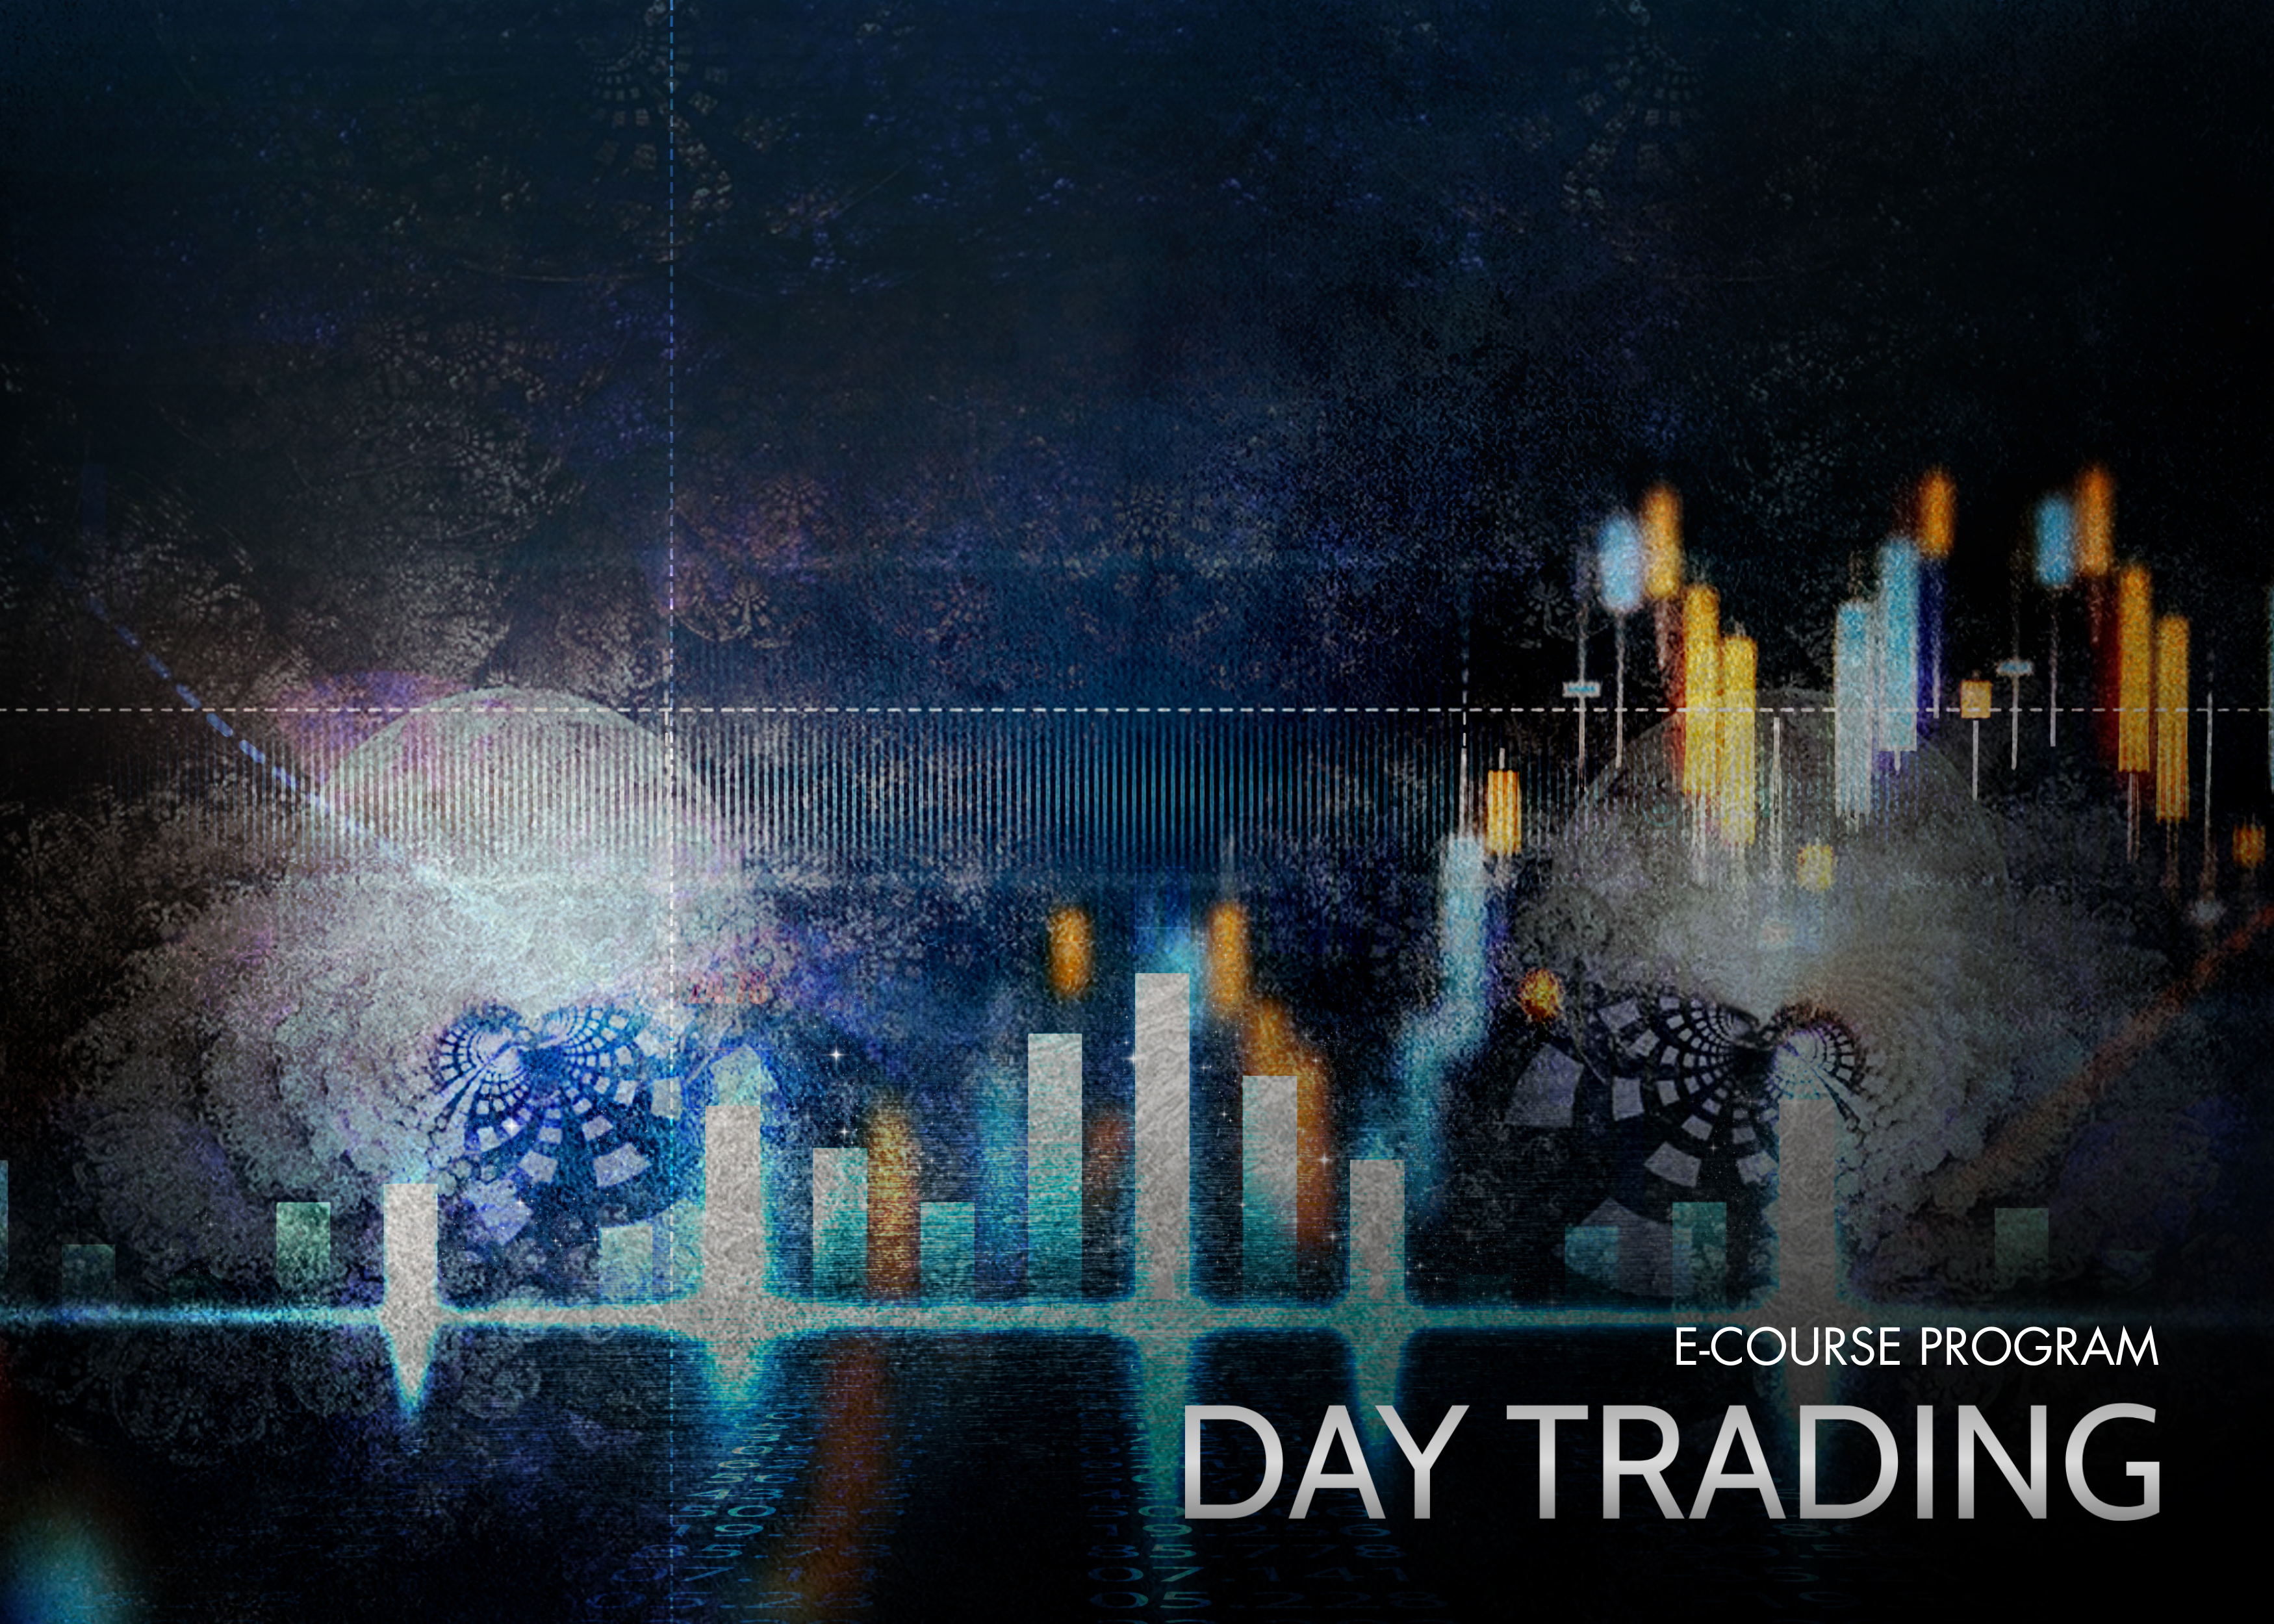 Day trading course image